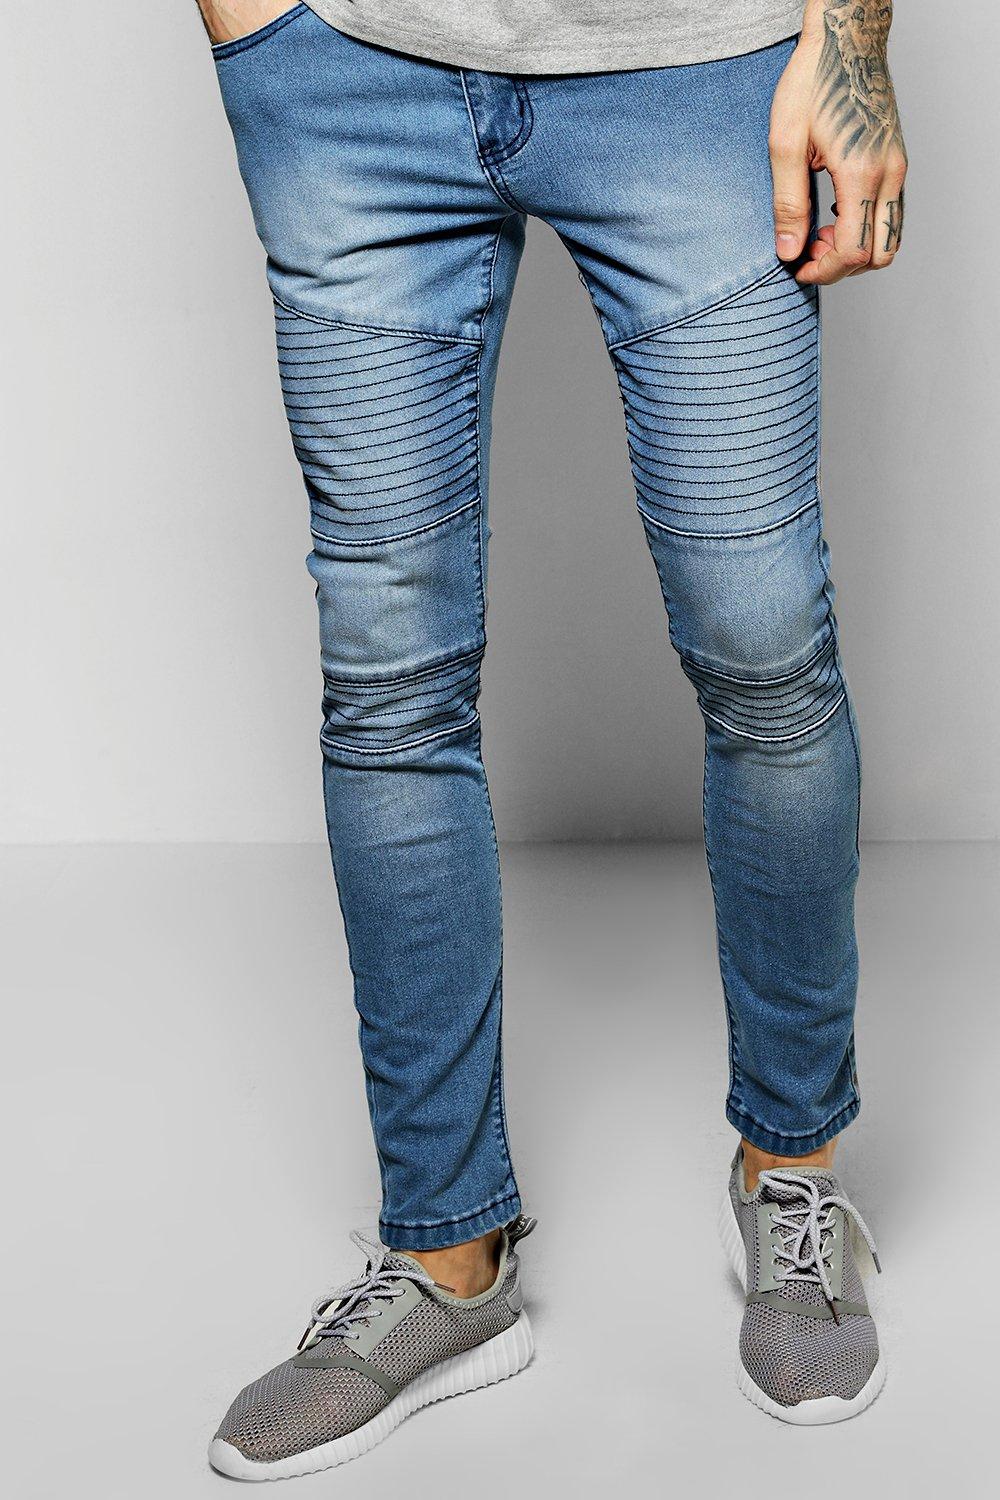 topshop cropped wide leg jeans